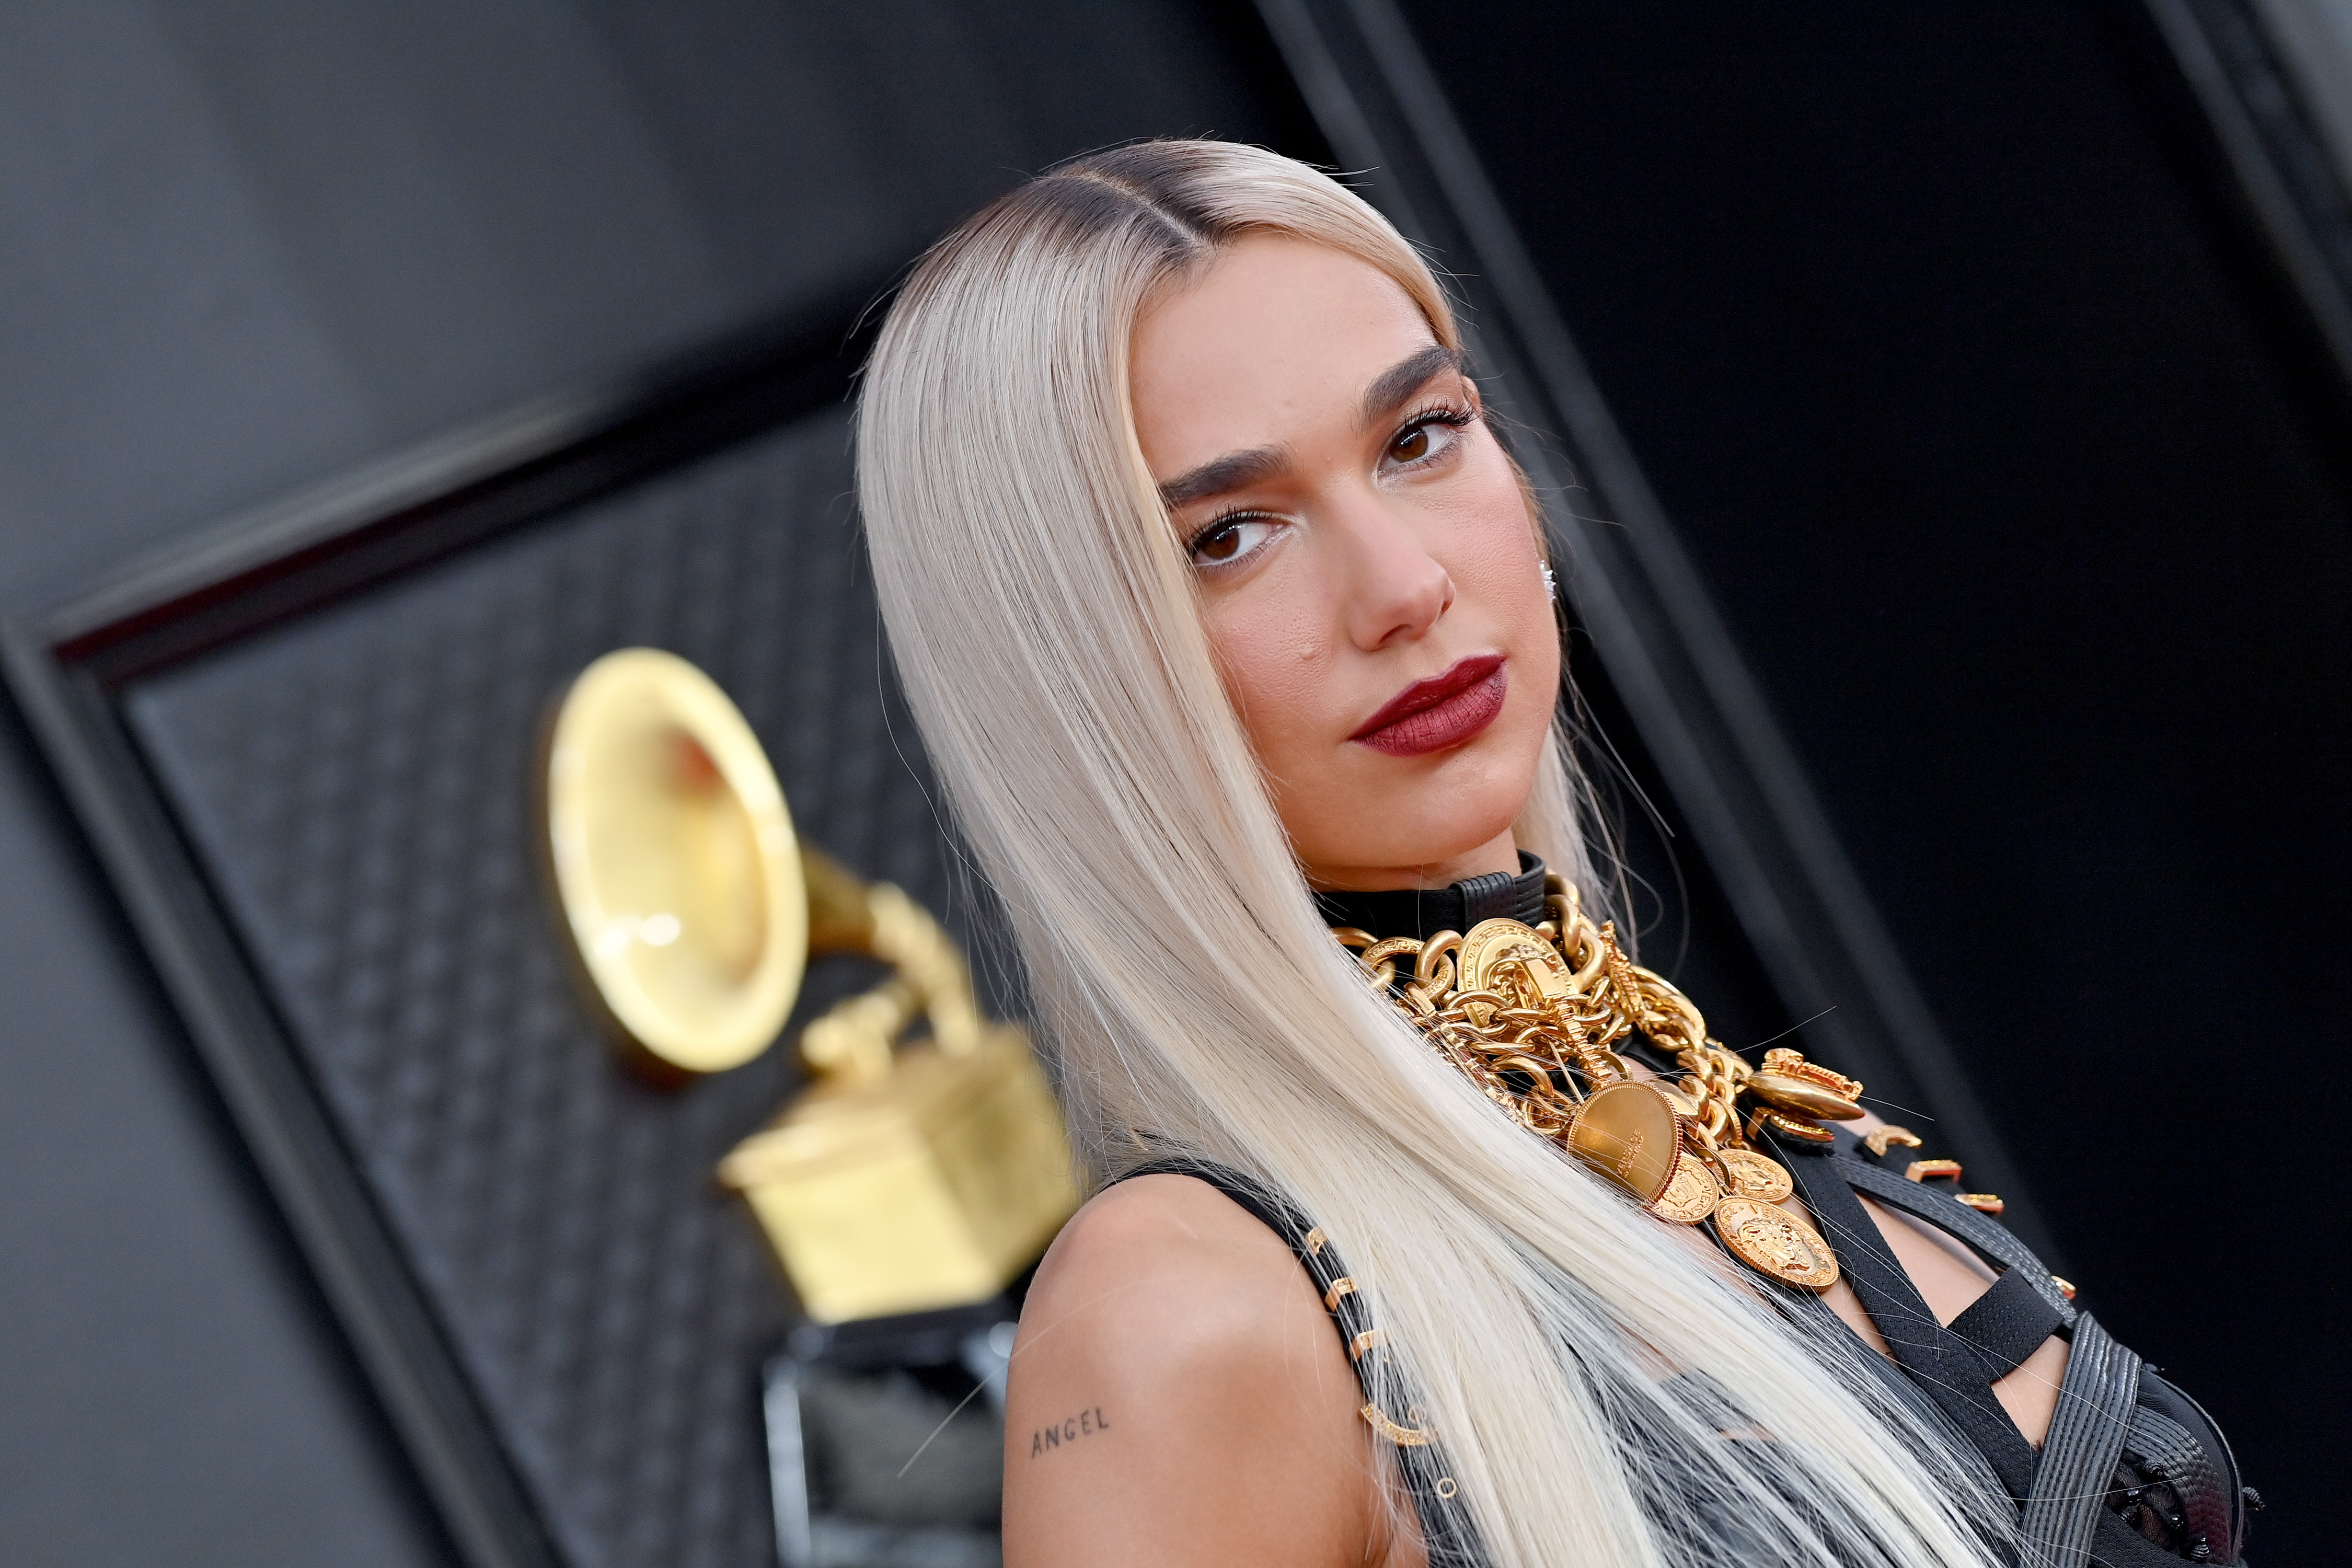 LAS VEGAS, NEVADA - APRIL 3: Dua Lipa attends the 64th Annual GRAMMY Awards at MGM Grand Garden Arena on April 3, 2022 in Las Vegas, Nevada.  She wears the same look as Madonna (Photo by Axelle/Bauer-Griffin/FilmMagic)